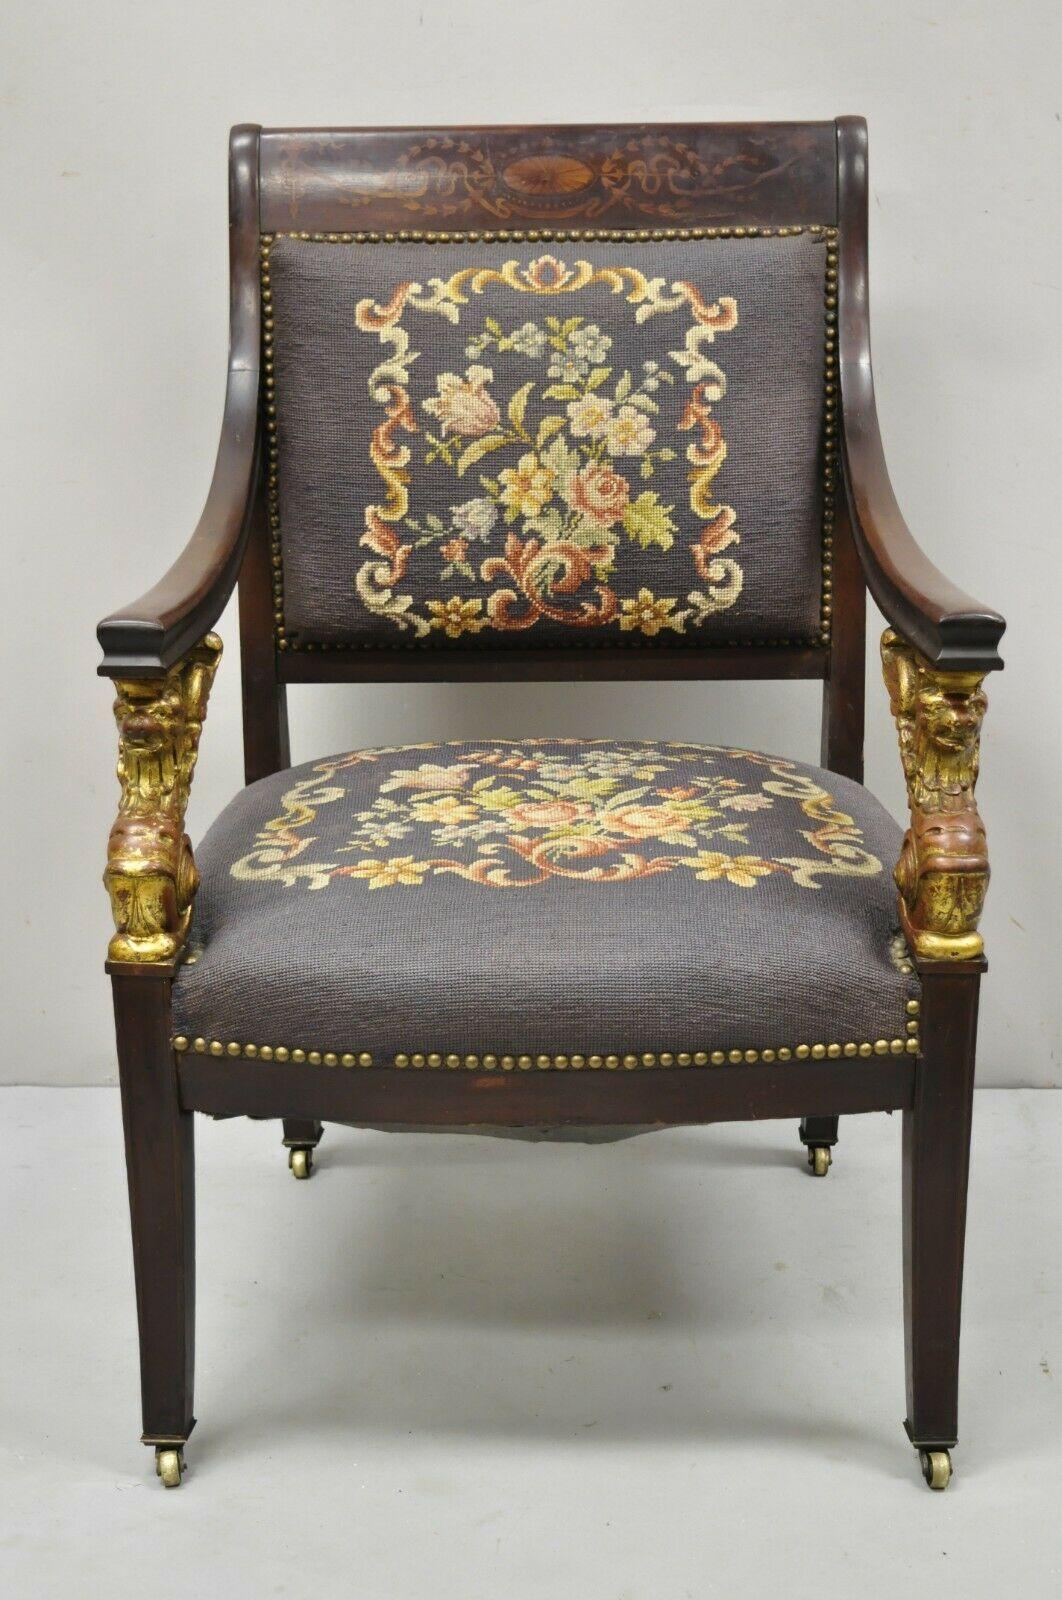 Antique French Empire giltwood winged Griffin needlepoint and inlay parlor arm chair. Item features gold gilt wood winged griffin arm supports, bell flower, pinwheel, and ribbon inlay, brass rolling casters, floral needlepoint back and seat, very